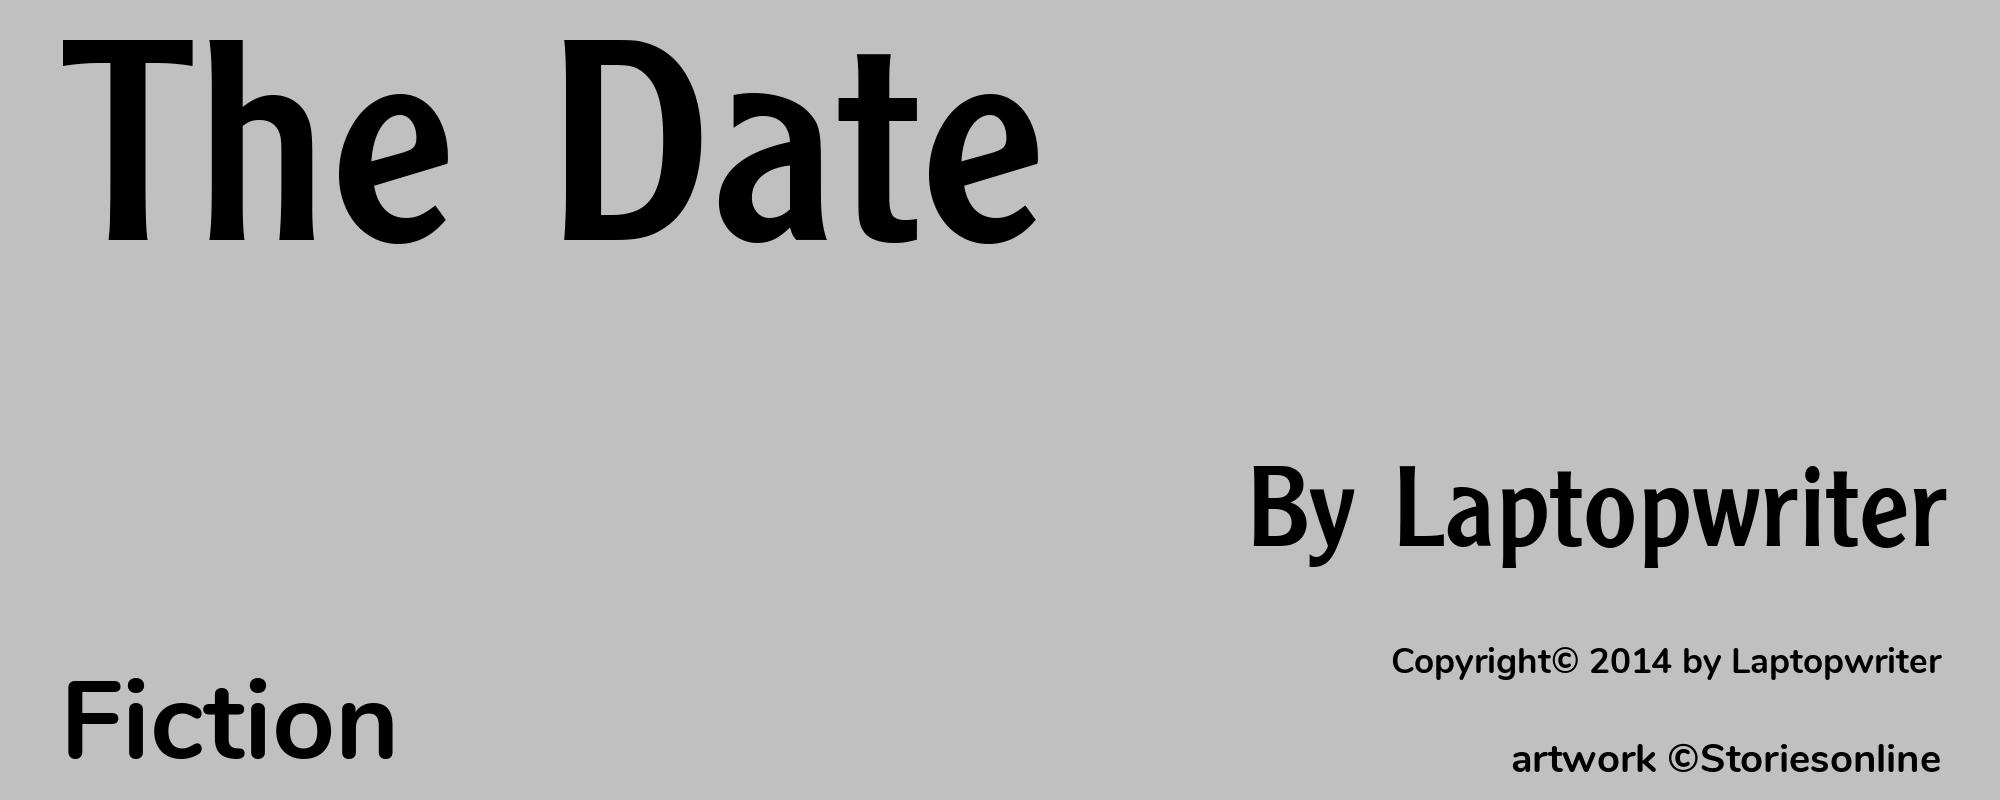 The Date - Cover